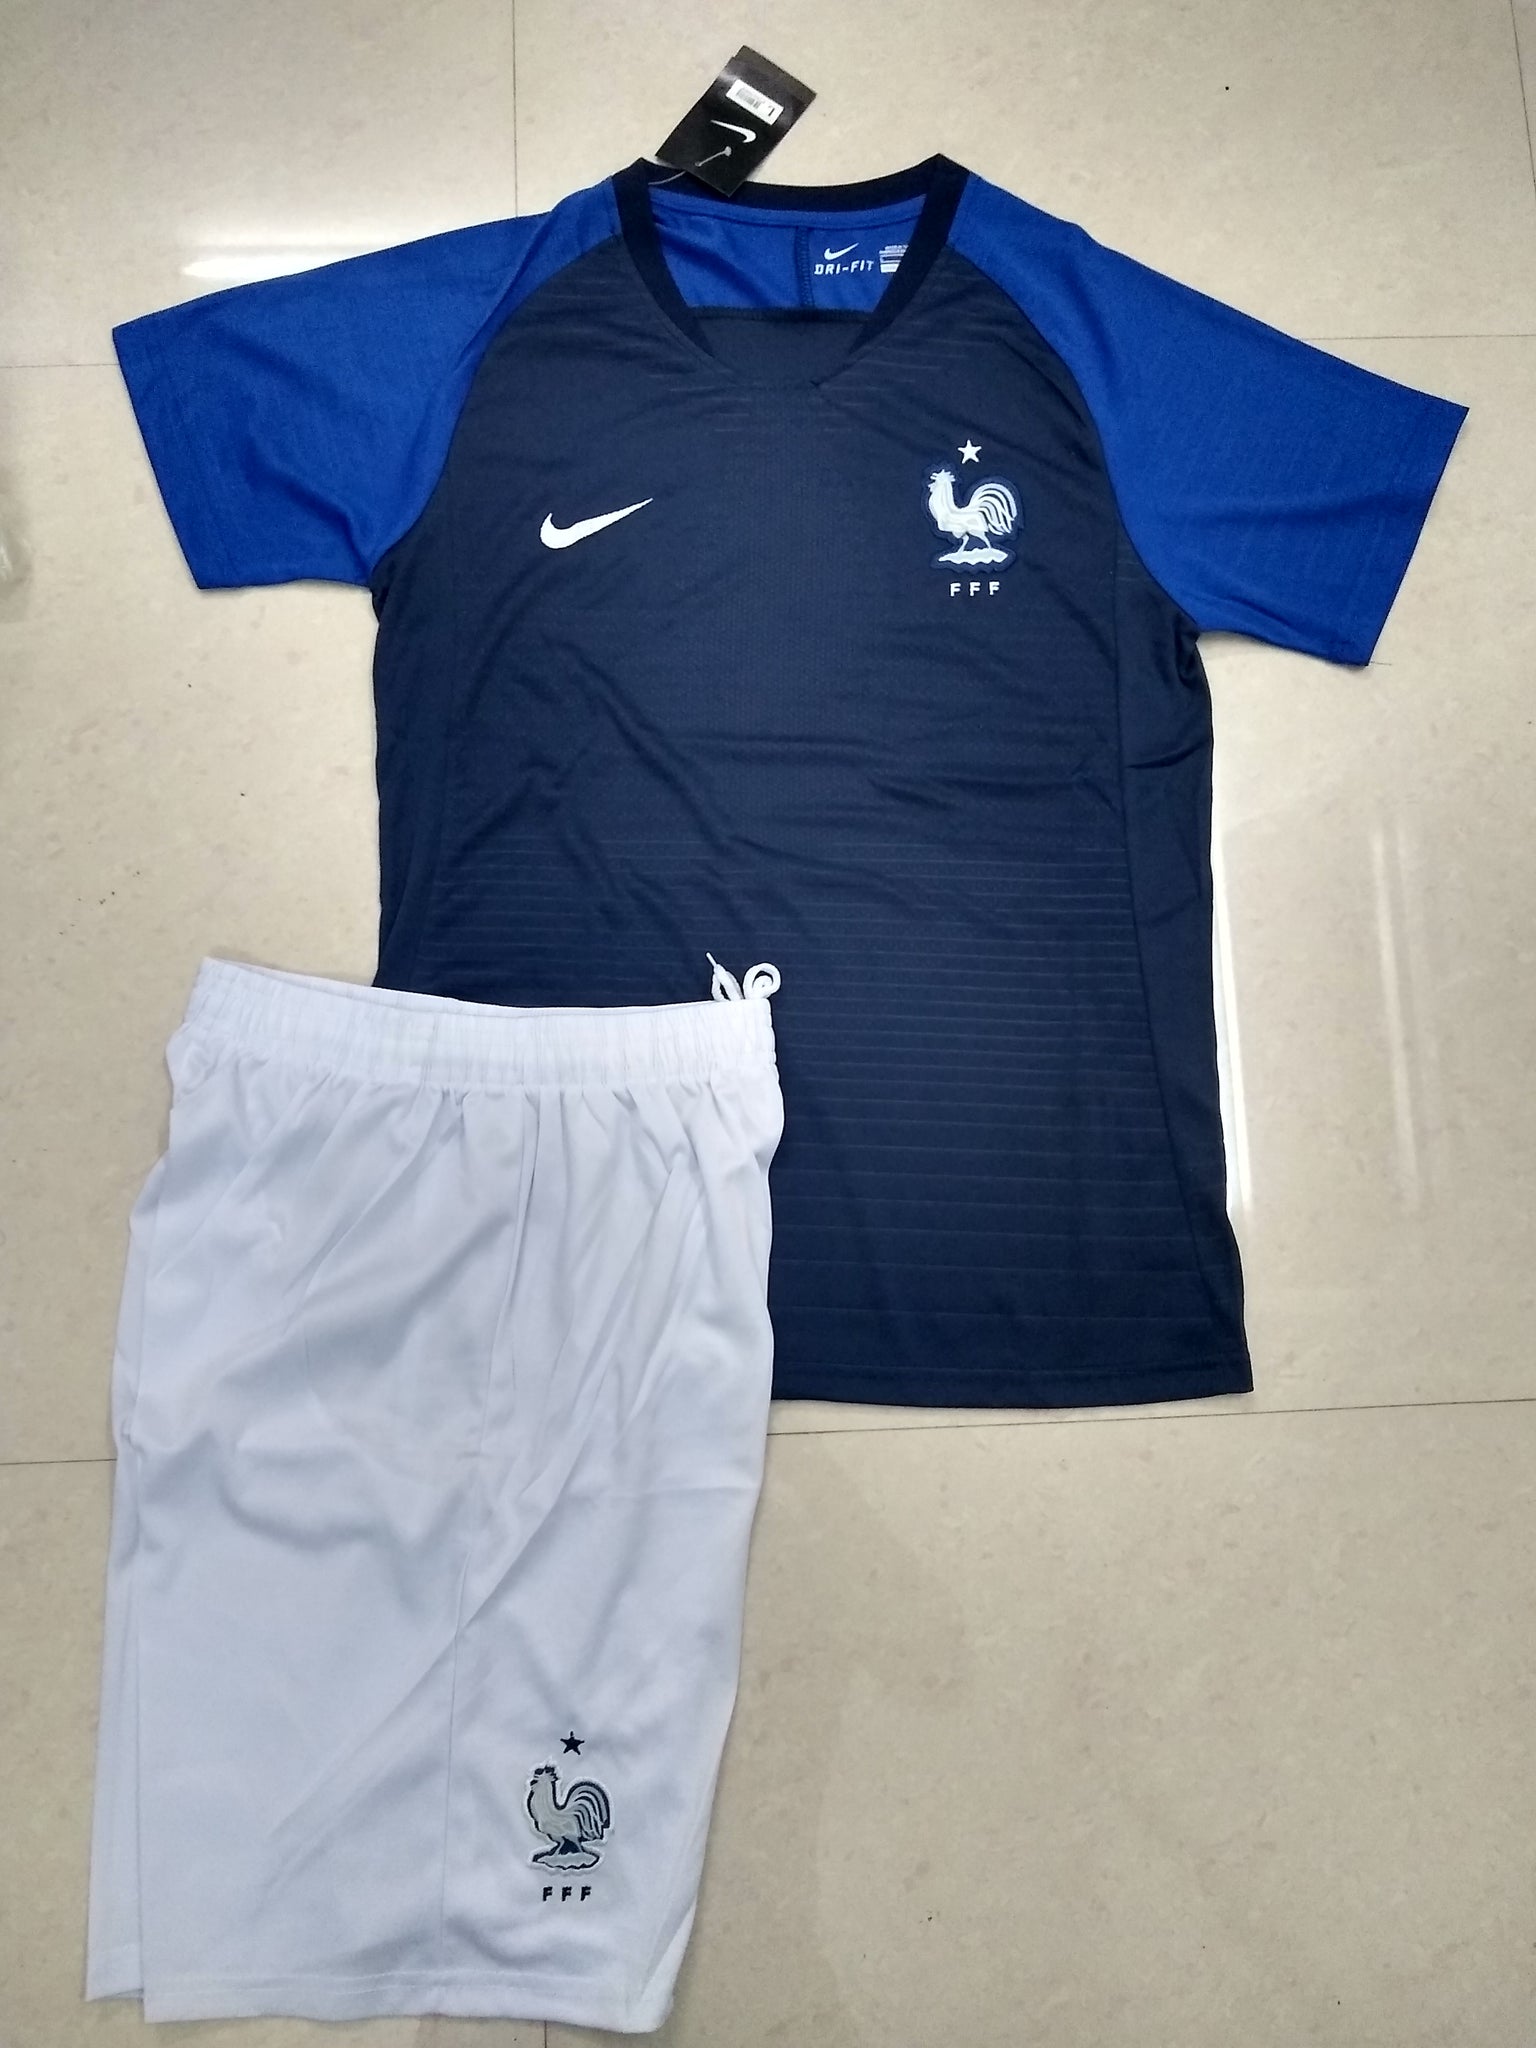 France Football Jersey Fifa World Cup 2018 Replica Kit